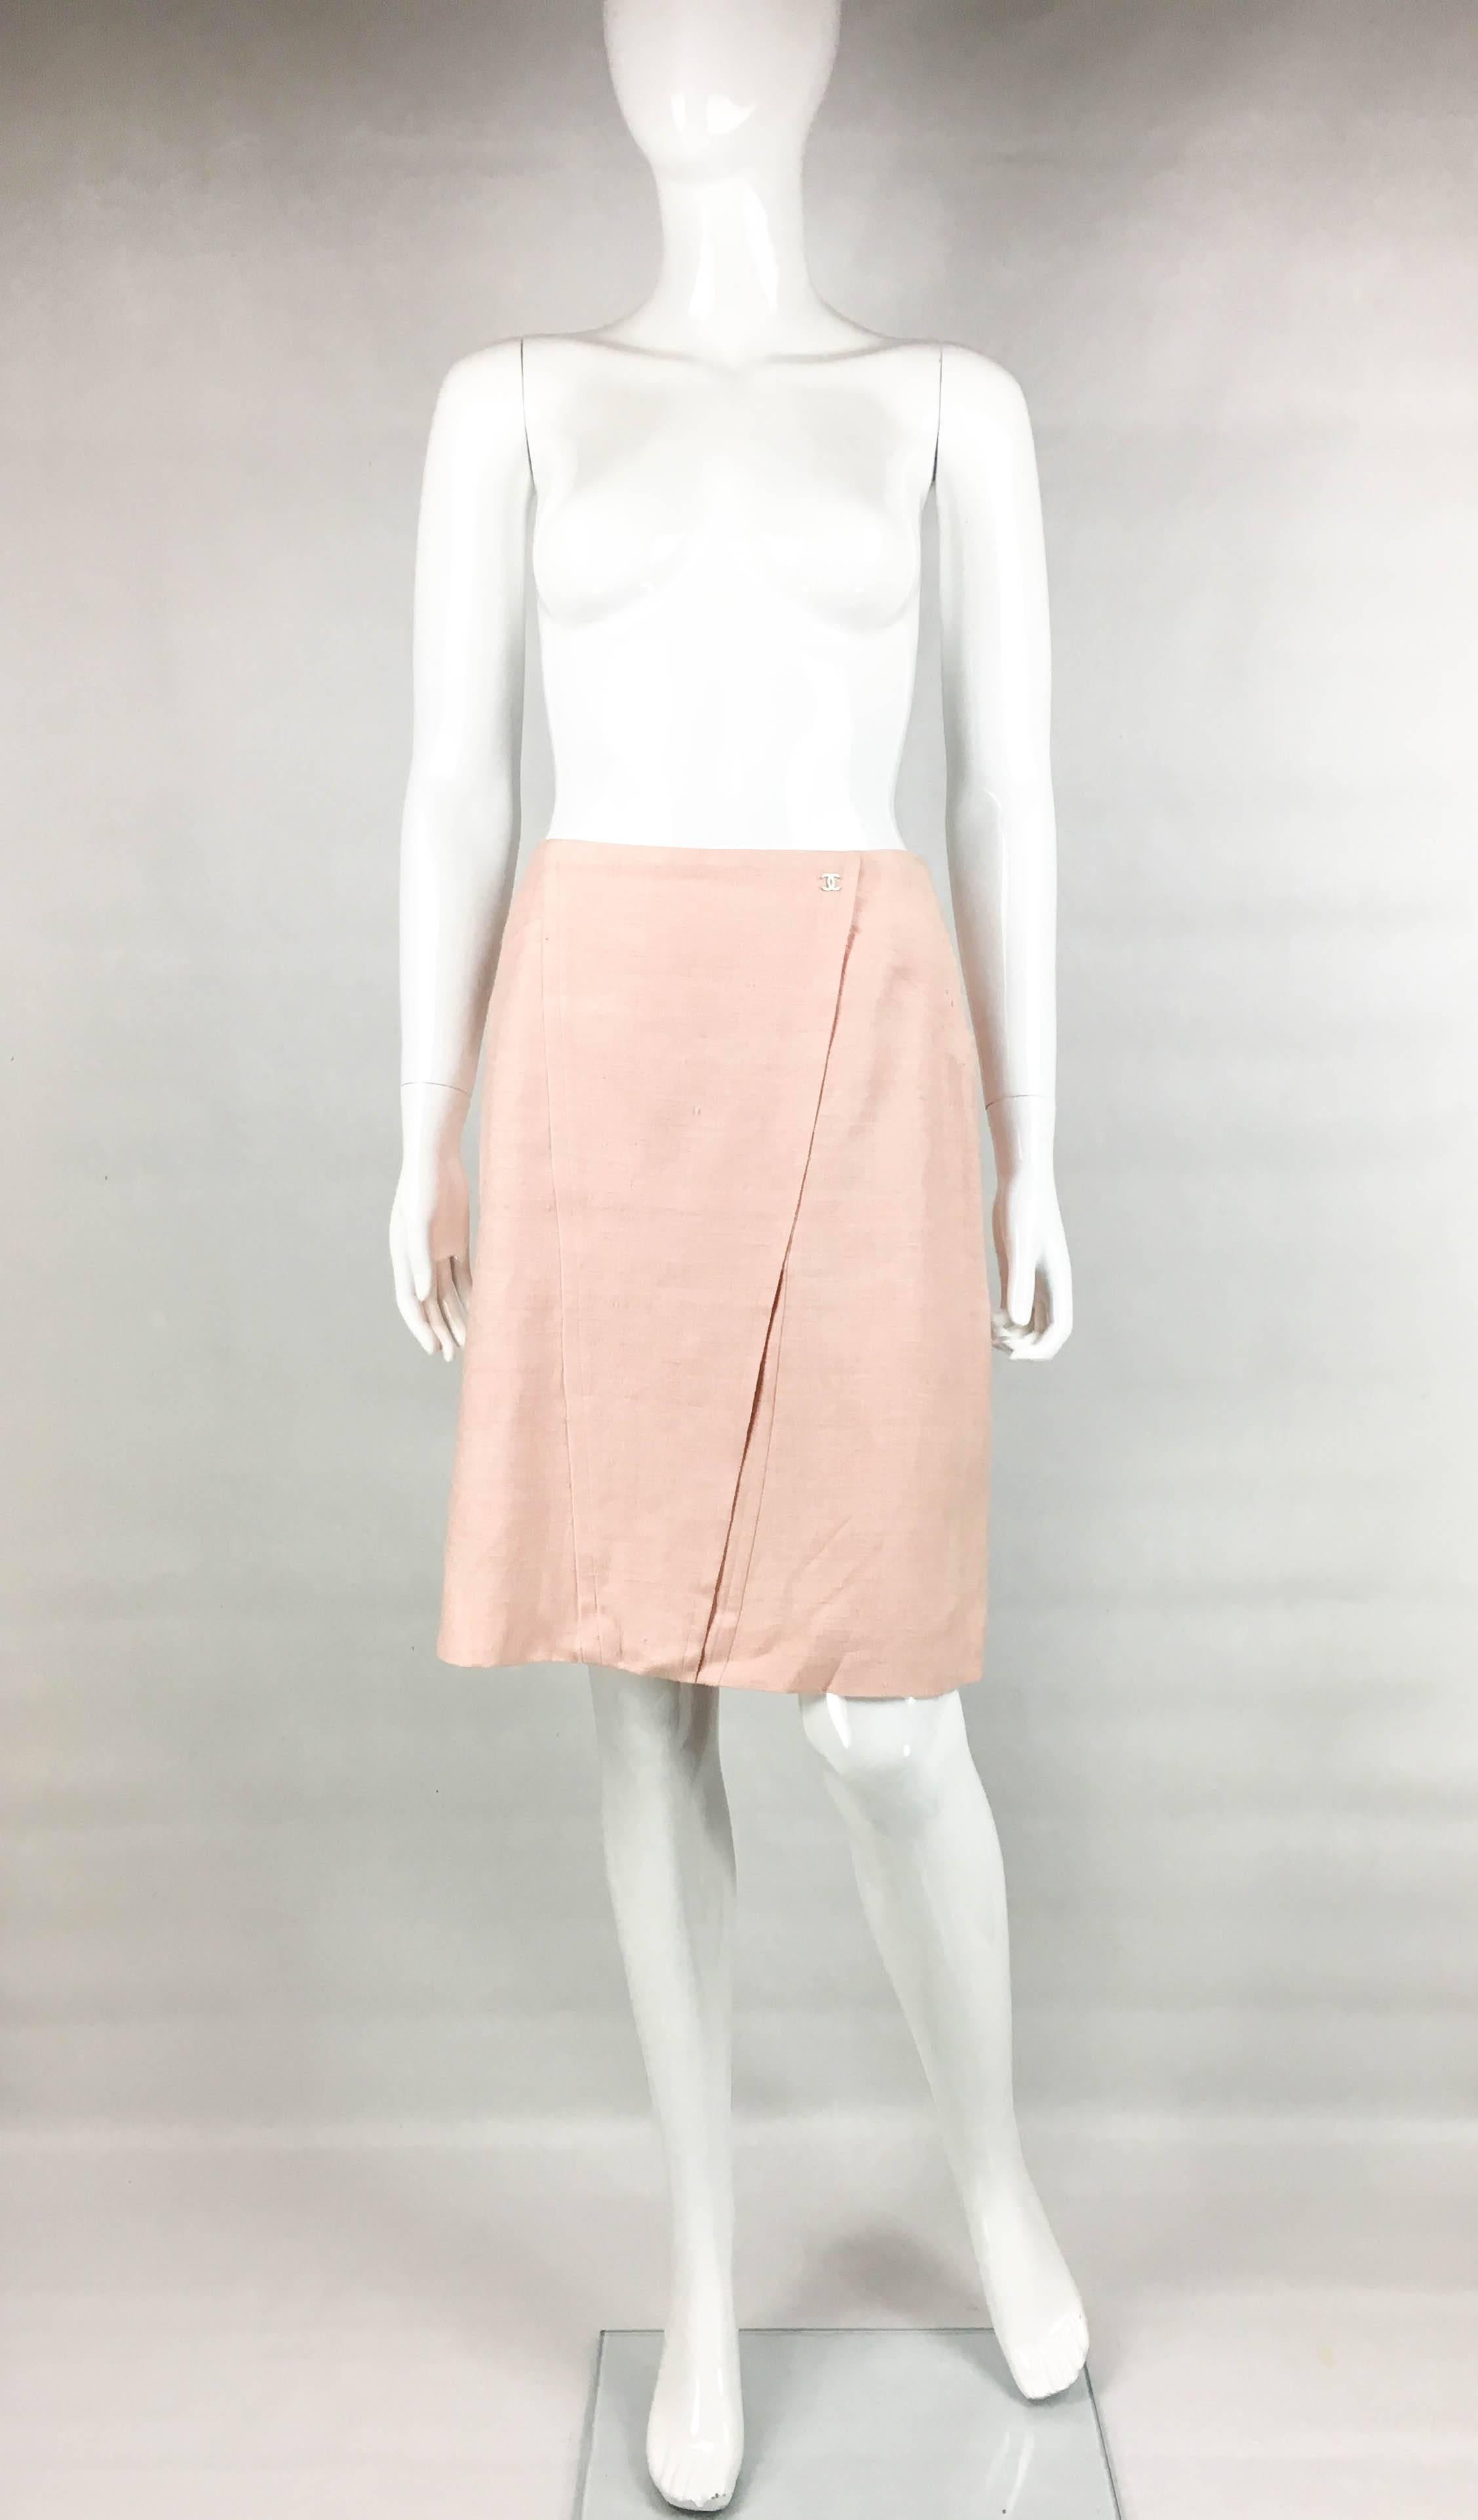 Stylish Chanel Pale Pink Silk Skirt. This very pretty slubbed silk skirt by Chanel is from the 2001 Cruise Collection. A-line shaped, it has a silver-tone ‘CC’ logo to one hip. Knee-length, the closure is by a hidden zipper on the back. A classy and